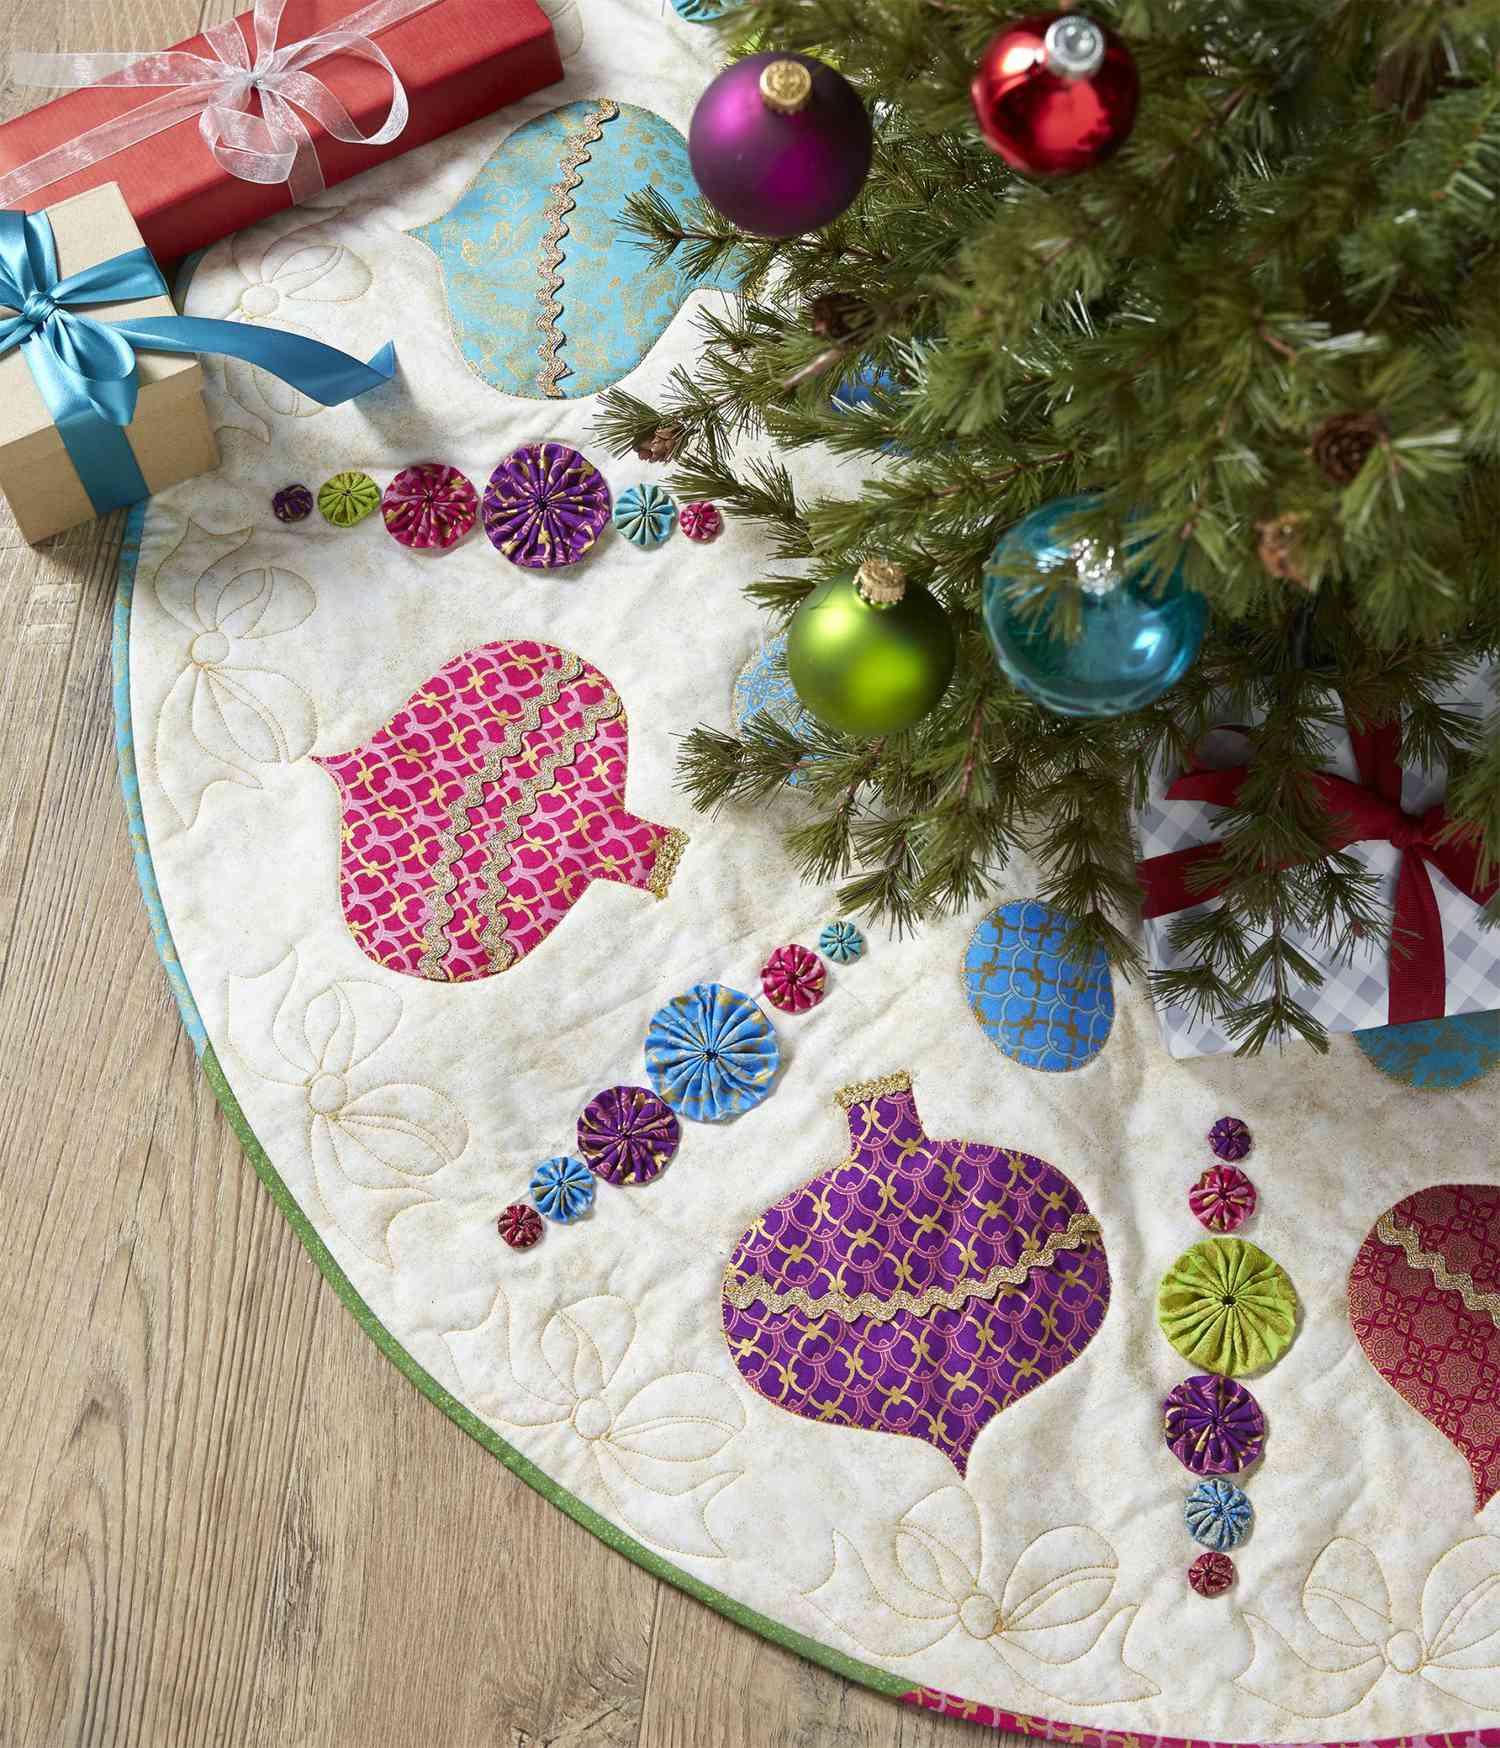 Carpet Door Mat Xmas Tree Decor Tree Skirts Ornaments New Year Decoration Colored Easter Eggs Background Polyester Tree Skirt rfy9u7 Christmas Tree Skirt 48 inches